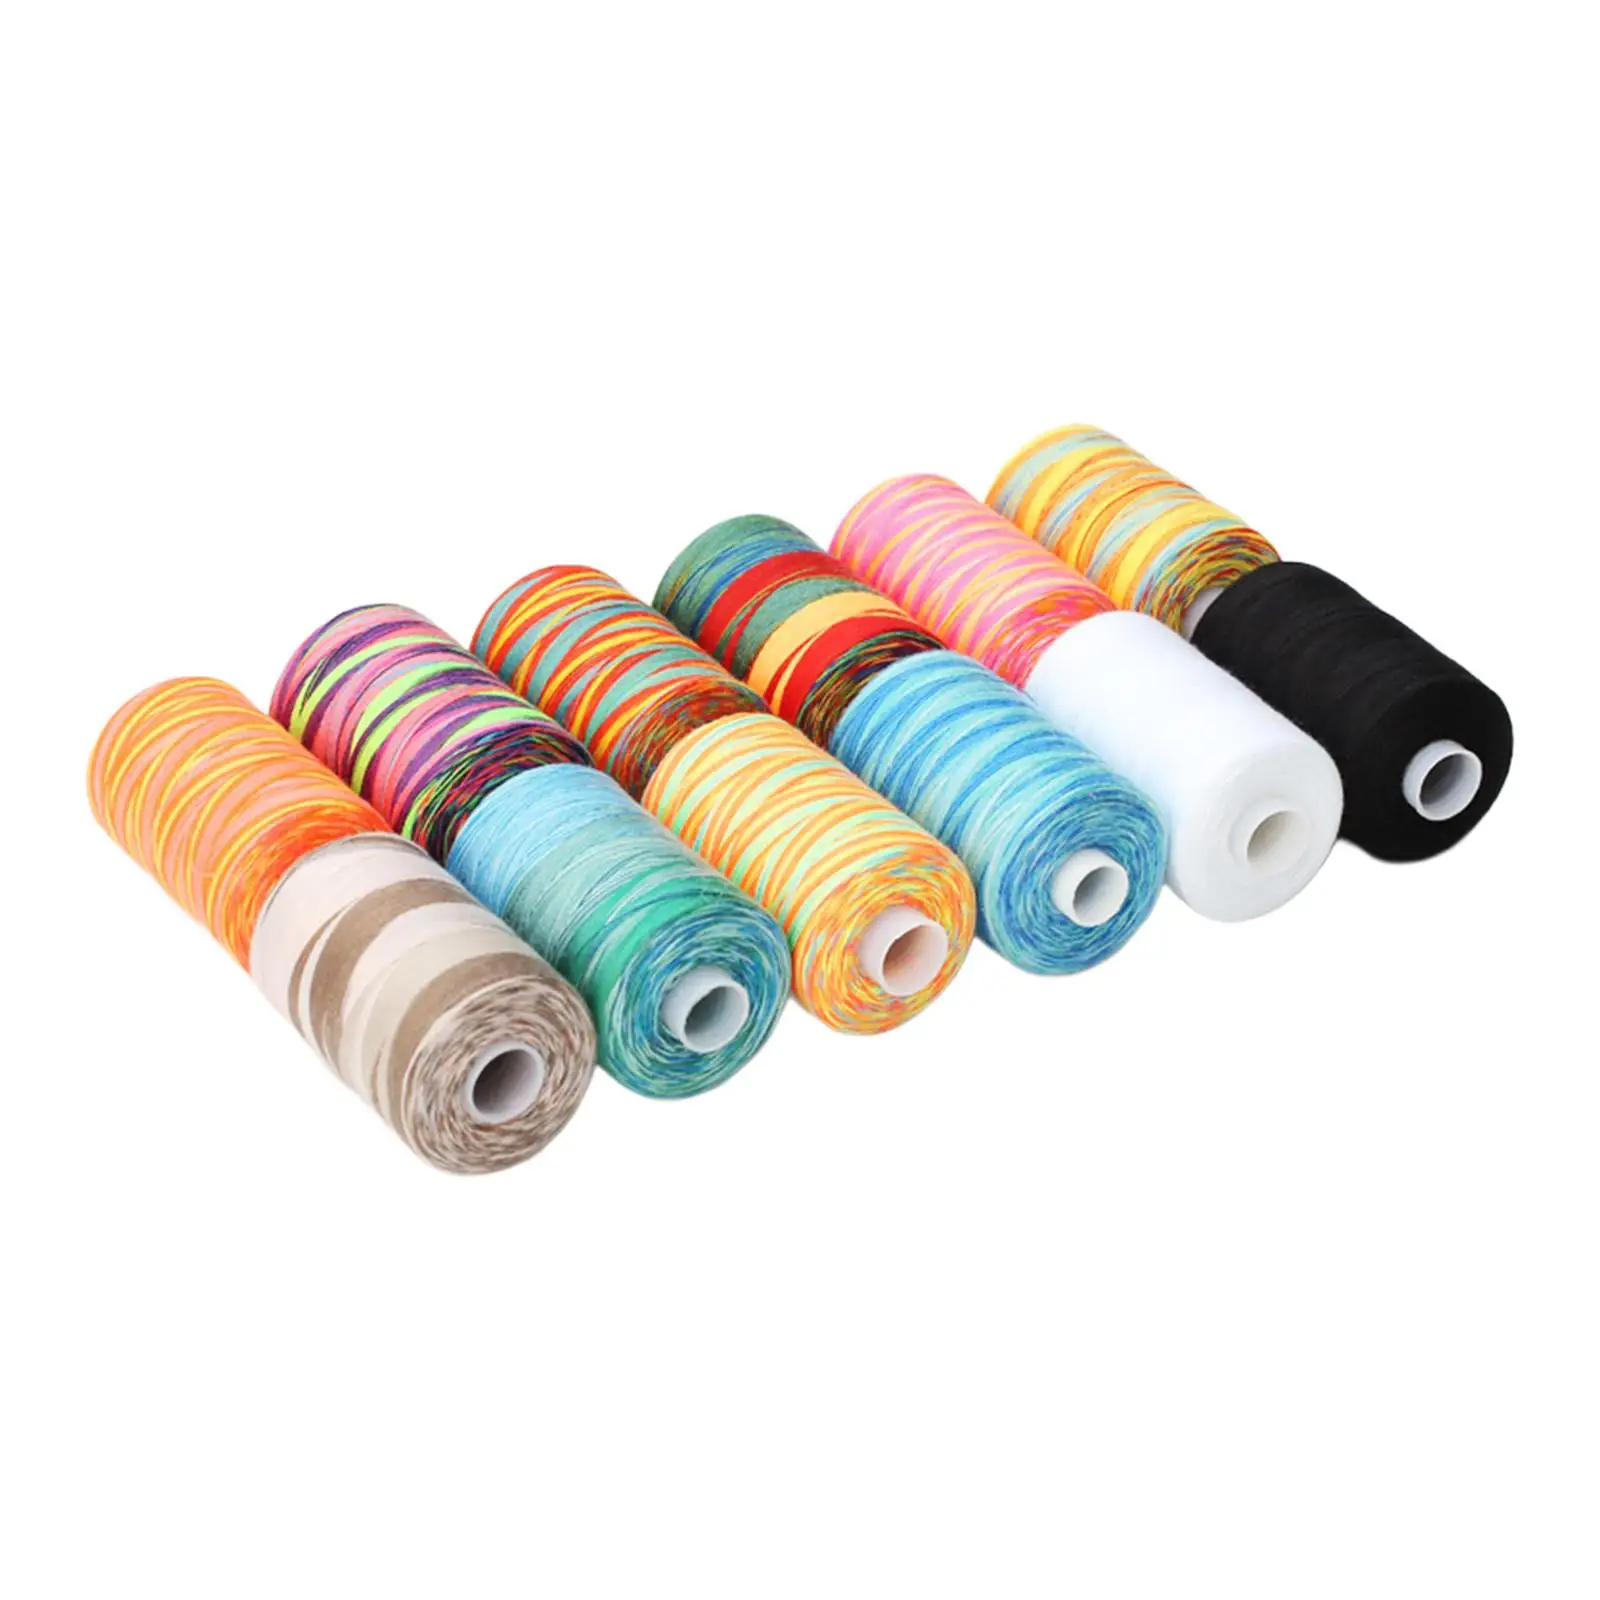 12 Pieces Colorful Sewing Thread Set Durable Sewing Machine Thread for Needlework Embroidery Hand Sewing DIY Crafts Supplies